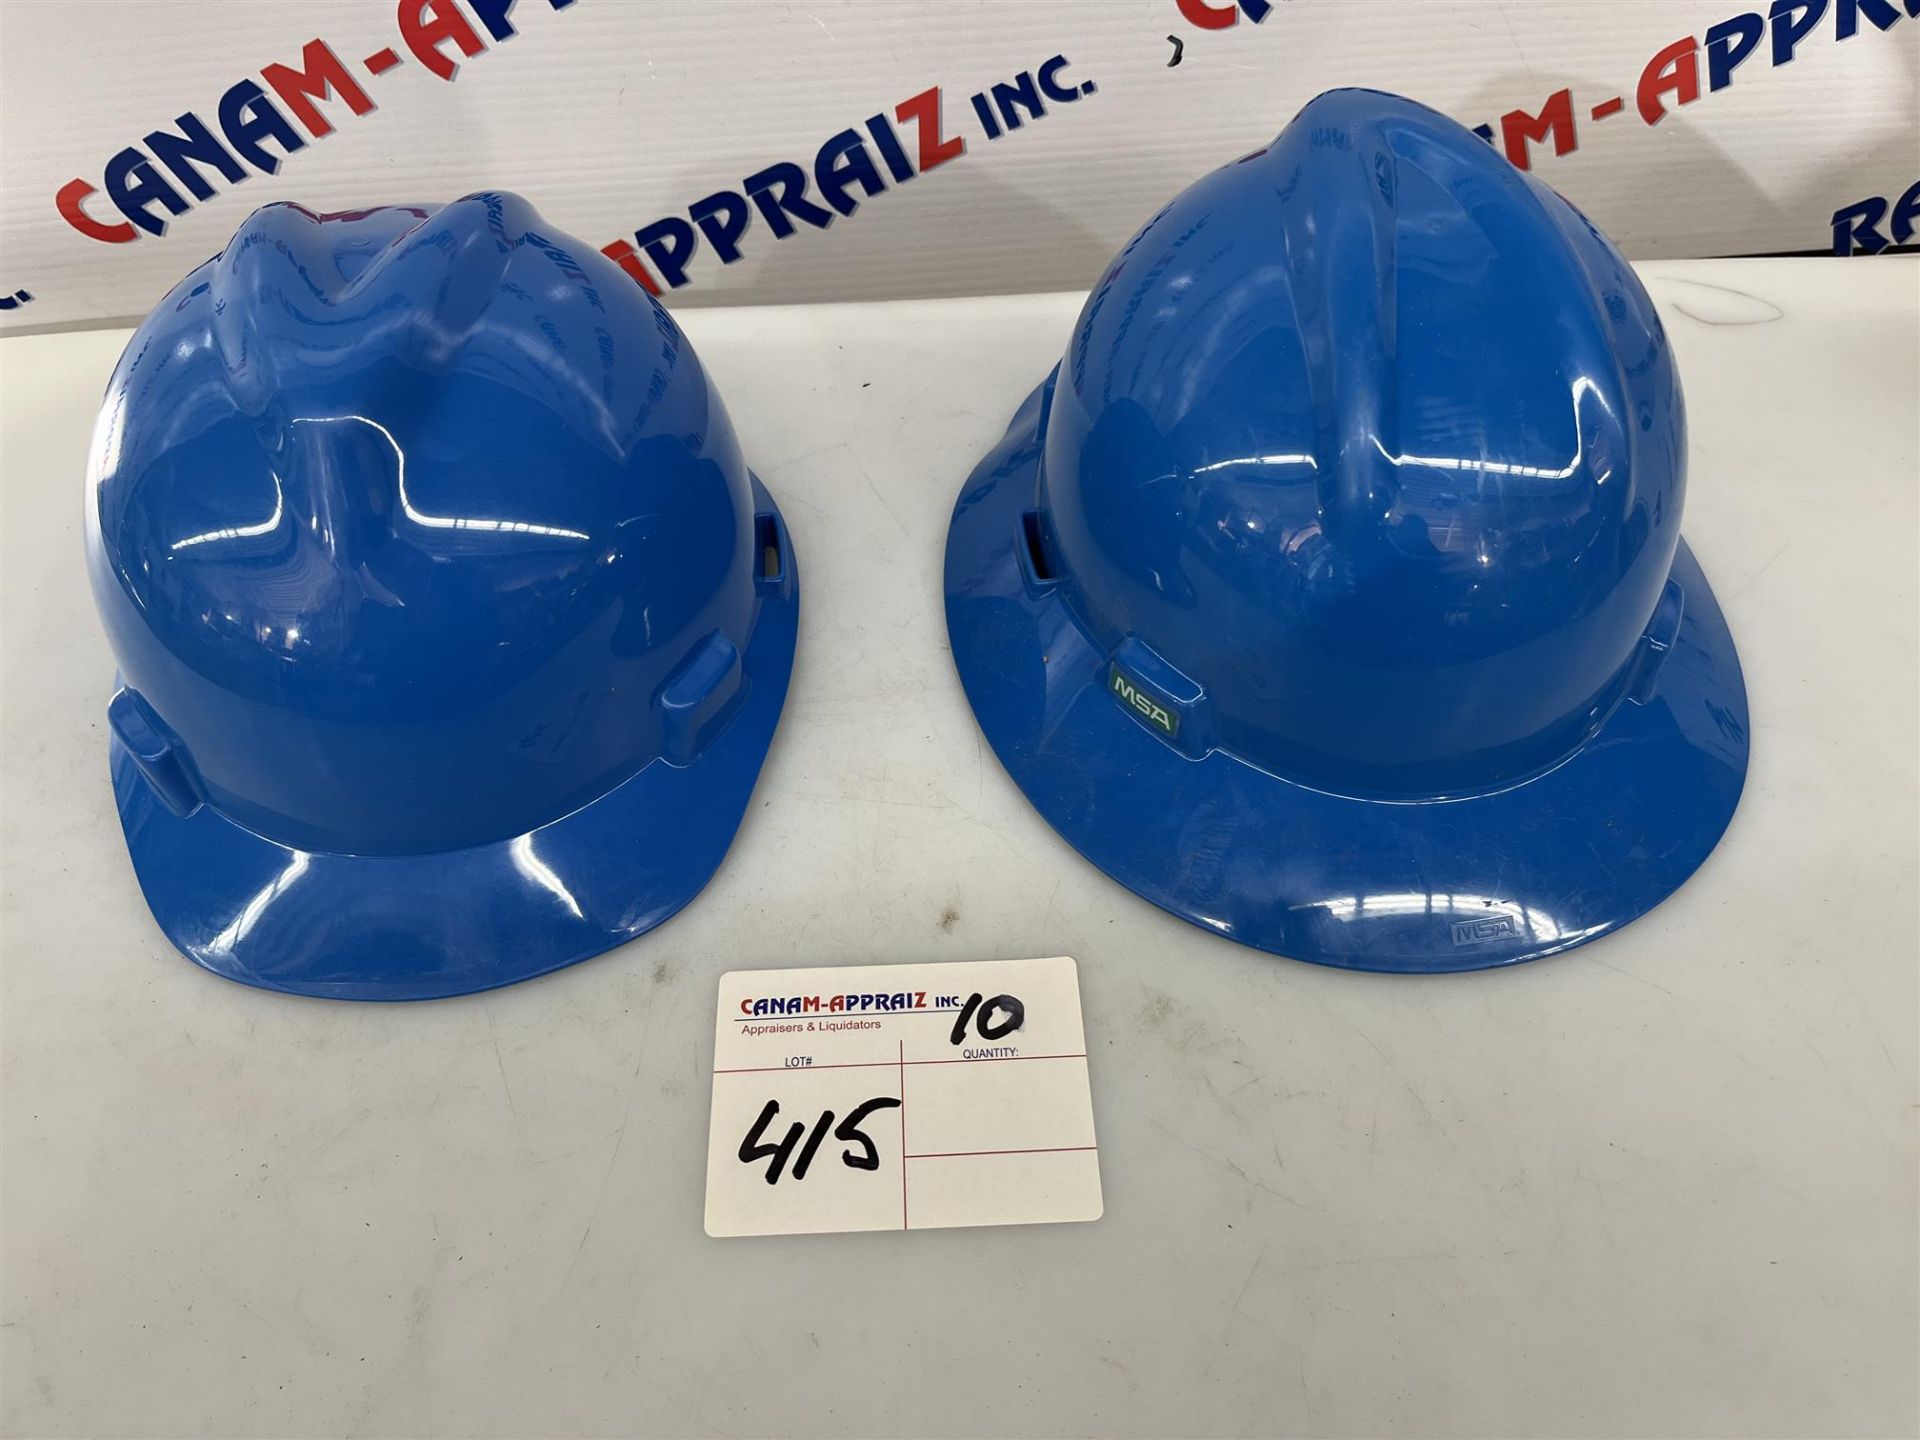 MSA Safety Hard Hats - 10 Pieces